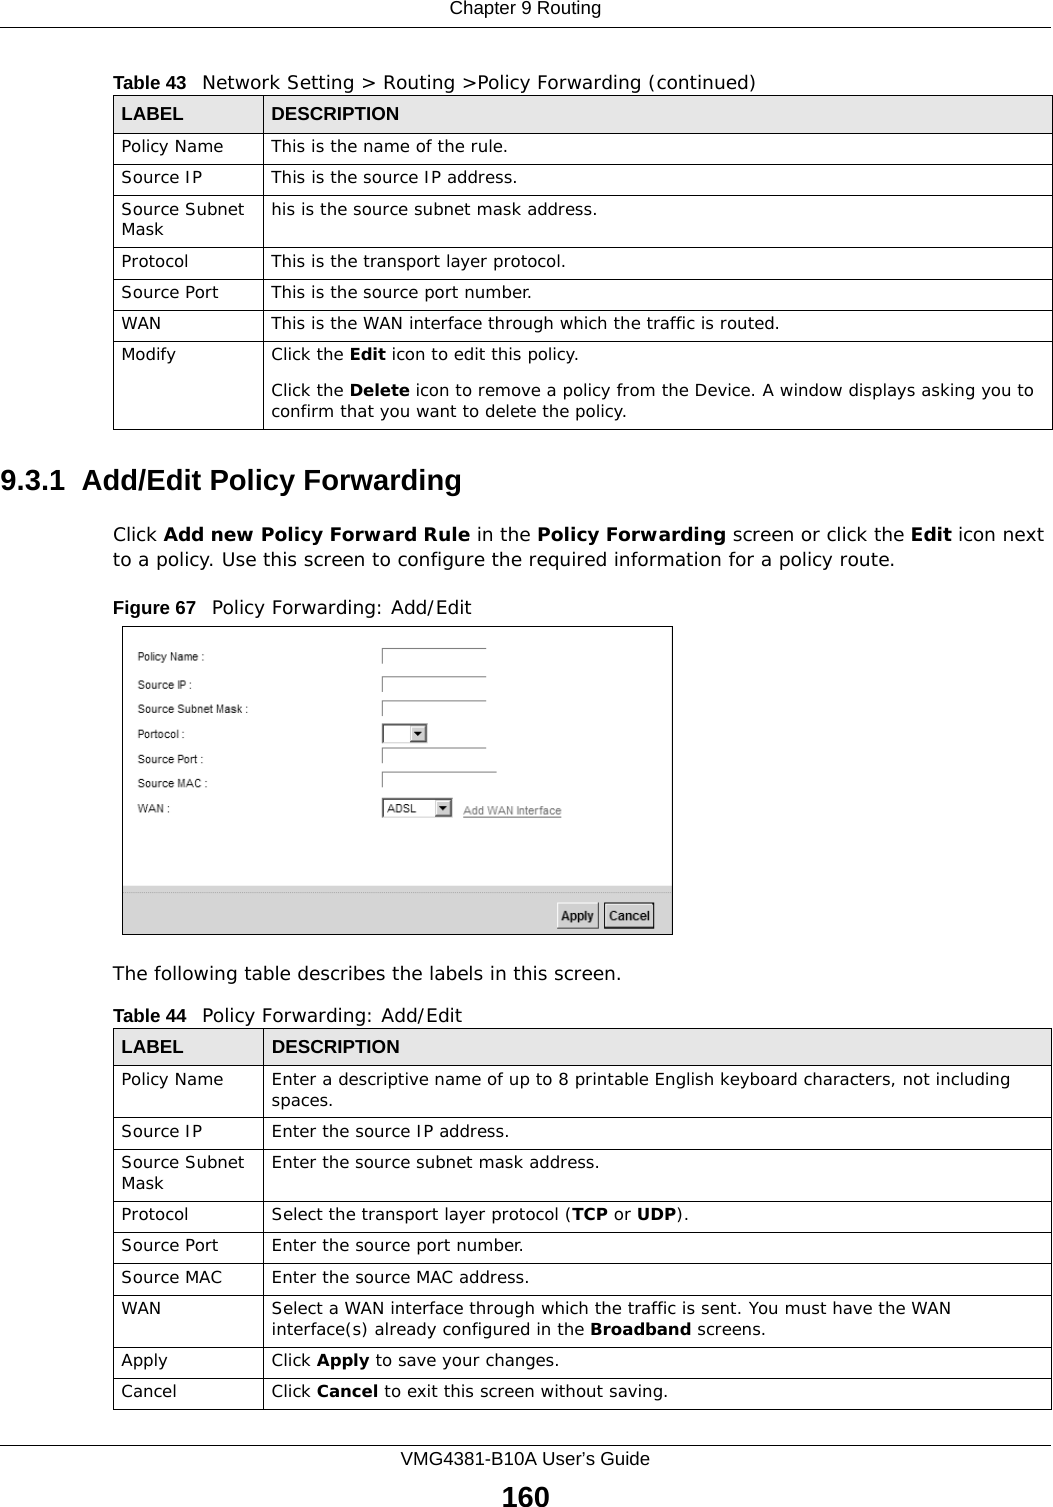 Chapter 9 RoutingVMG4381-B10A User’s Guide1609.3.1  Add/Edit Policy Forwarding Click Add new Policy Forward Rule in the Policy Forwarding screen or click the Edit icon next to a policy. Use this screen to configure the required information for a policy route.Figure 67   Policy Forwarding: Add/Edit The following table describes the labels in this screen. Policy Name This is the name of the rule.Source IP This is the source IP address.Source Subnet Mask his is the source subnet mask address.Protocol This is the transport layer protocol.Source Port This is the source port number.WAN This is the WAN interface through which the traffic is routed. Modify Click the Edit icon to edit this policy.Click the Delete icon to remove a policy from the Device. A window displays asking you to confirm that you want to delete the policy. Table 43   Network Setting &gt; Routing &gt;Policy Forwarding (continued)LABEL DESCRIPTIONTable 44   Policy Forwarding: Add/EditLABEL DESCRIPTIONPolicy Name Enter a descriptive name of up to 8 printable English keyboard characters, not including spaces.Source IP  Enter the source IP address.Source Subnet Mask Enter the source subnet mask address. Protocol Select the transport layer protocol (TCP or UDP). Source Port  Enter the source port number. Source MAC  Enter the source MAC address. WAN Select a WAN interface through which the traffic is sent. You must have the WAN interface(s) already configured in the Broadband screens. Apply Click Apply to save your changes.Cancel Click Cancel to exit this screen without saving.